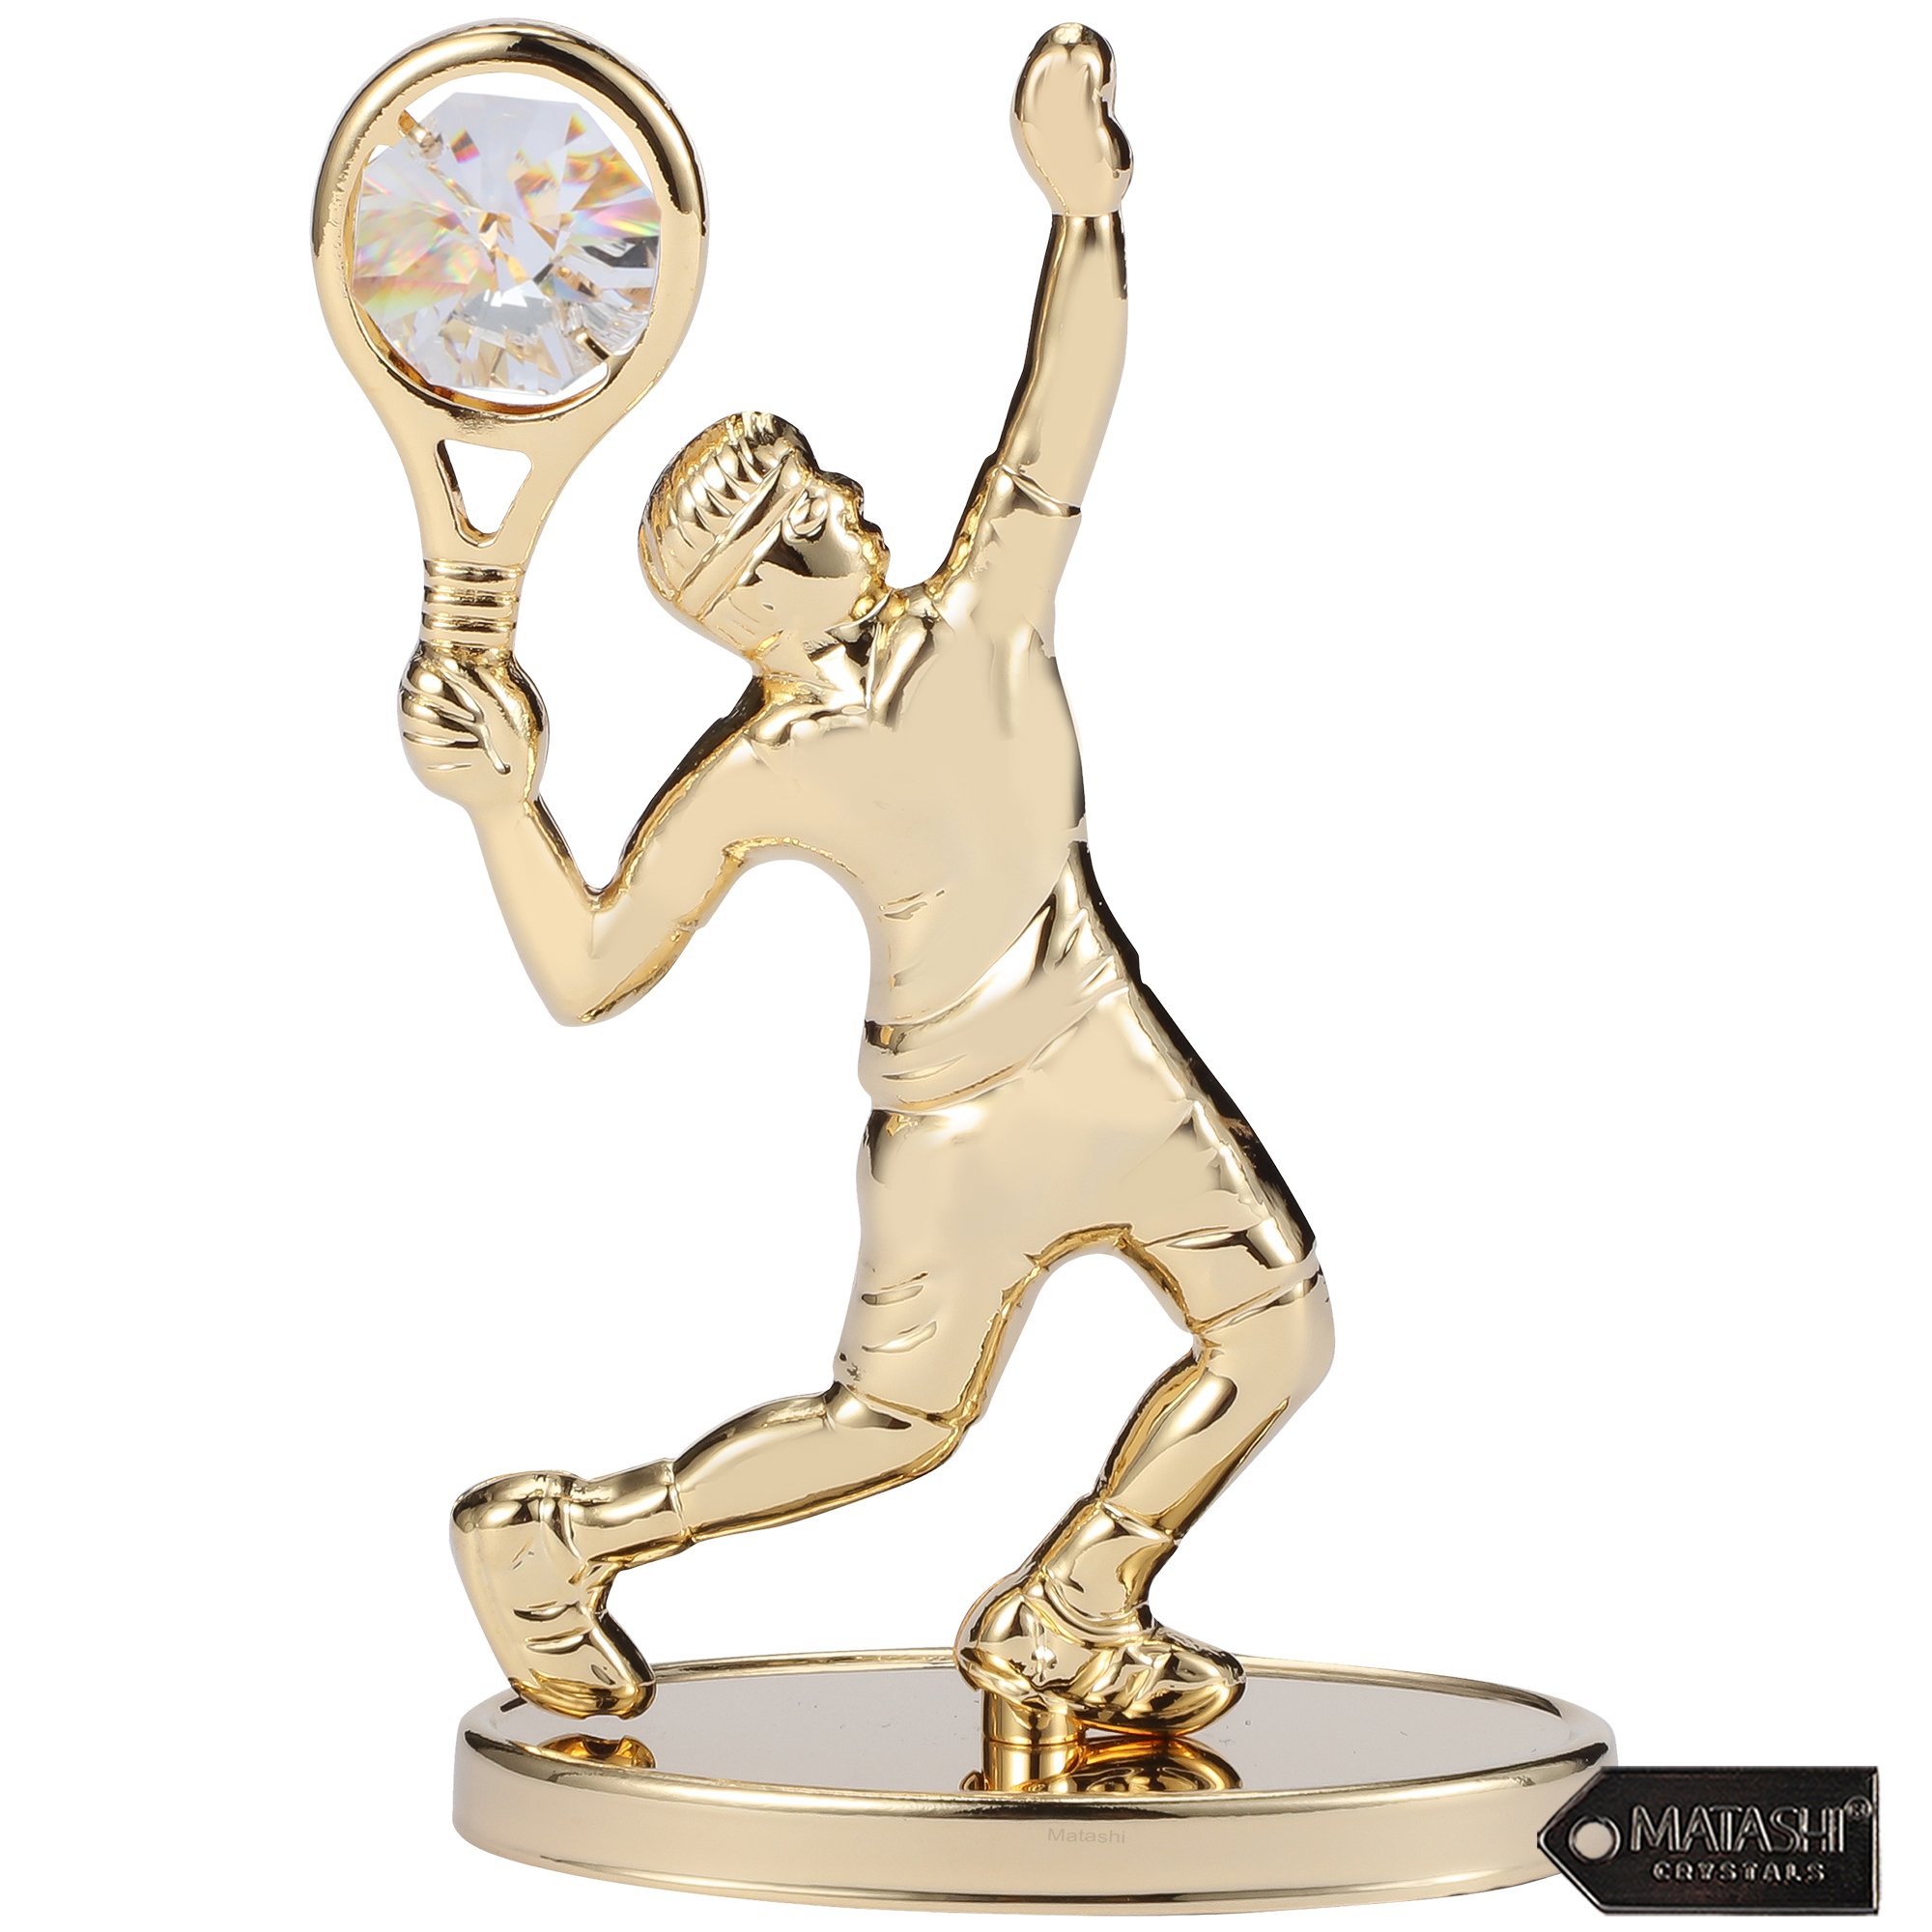 Matashi 24K Gold Plated Tennis Player Figurine Embellished With Crystals, Gift For Sports Fan, Desk Accessories, Trophy, Office DÃ©cor